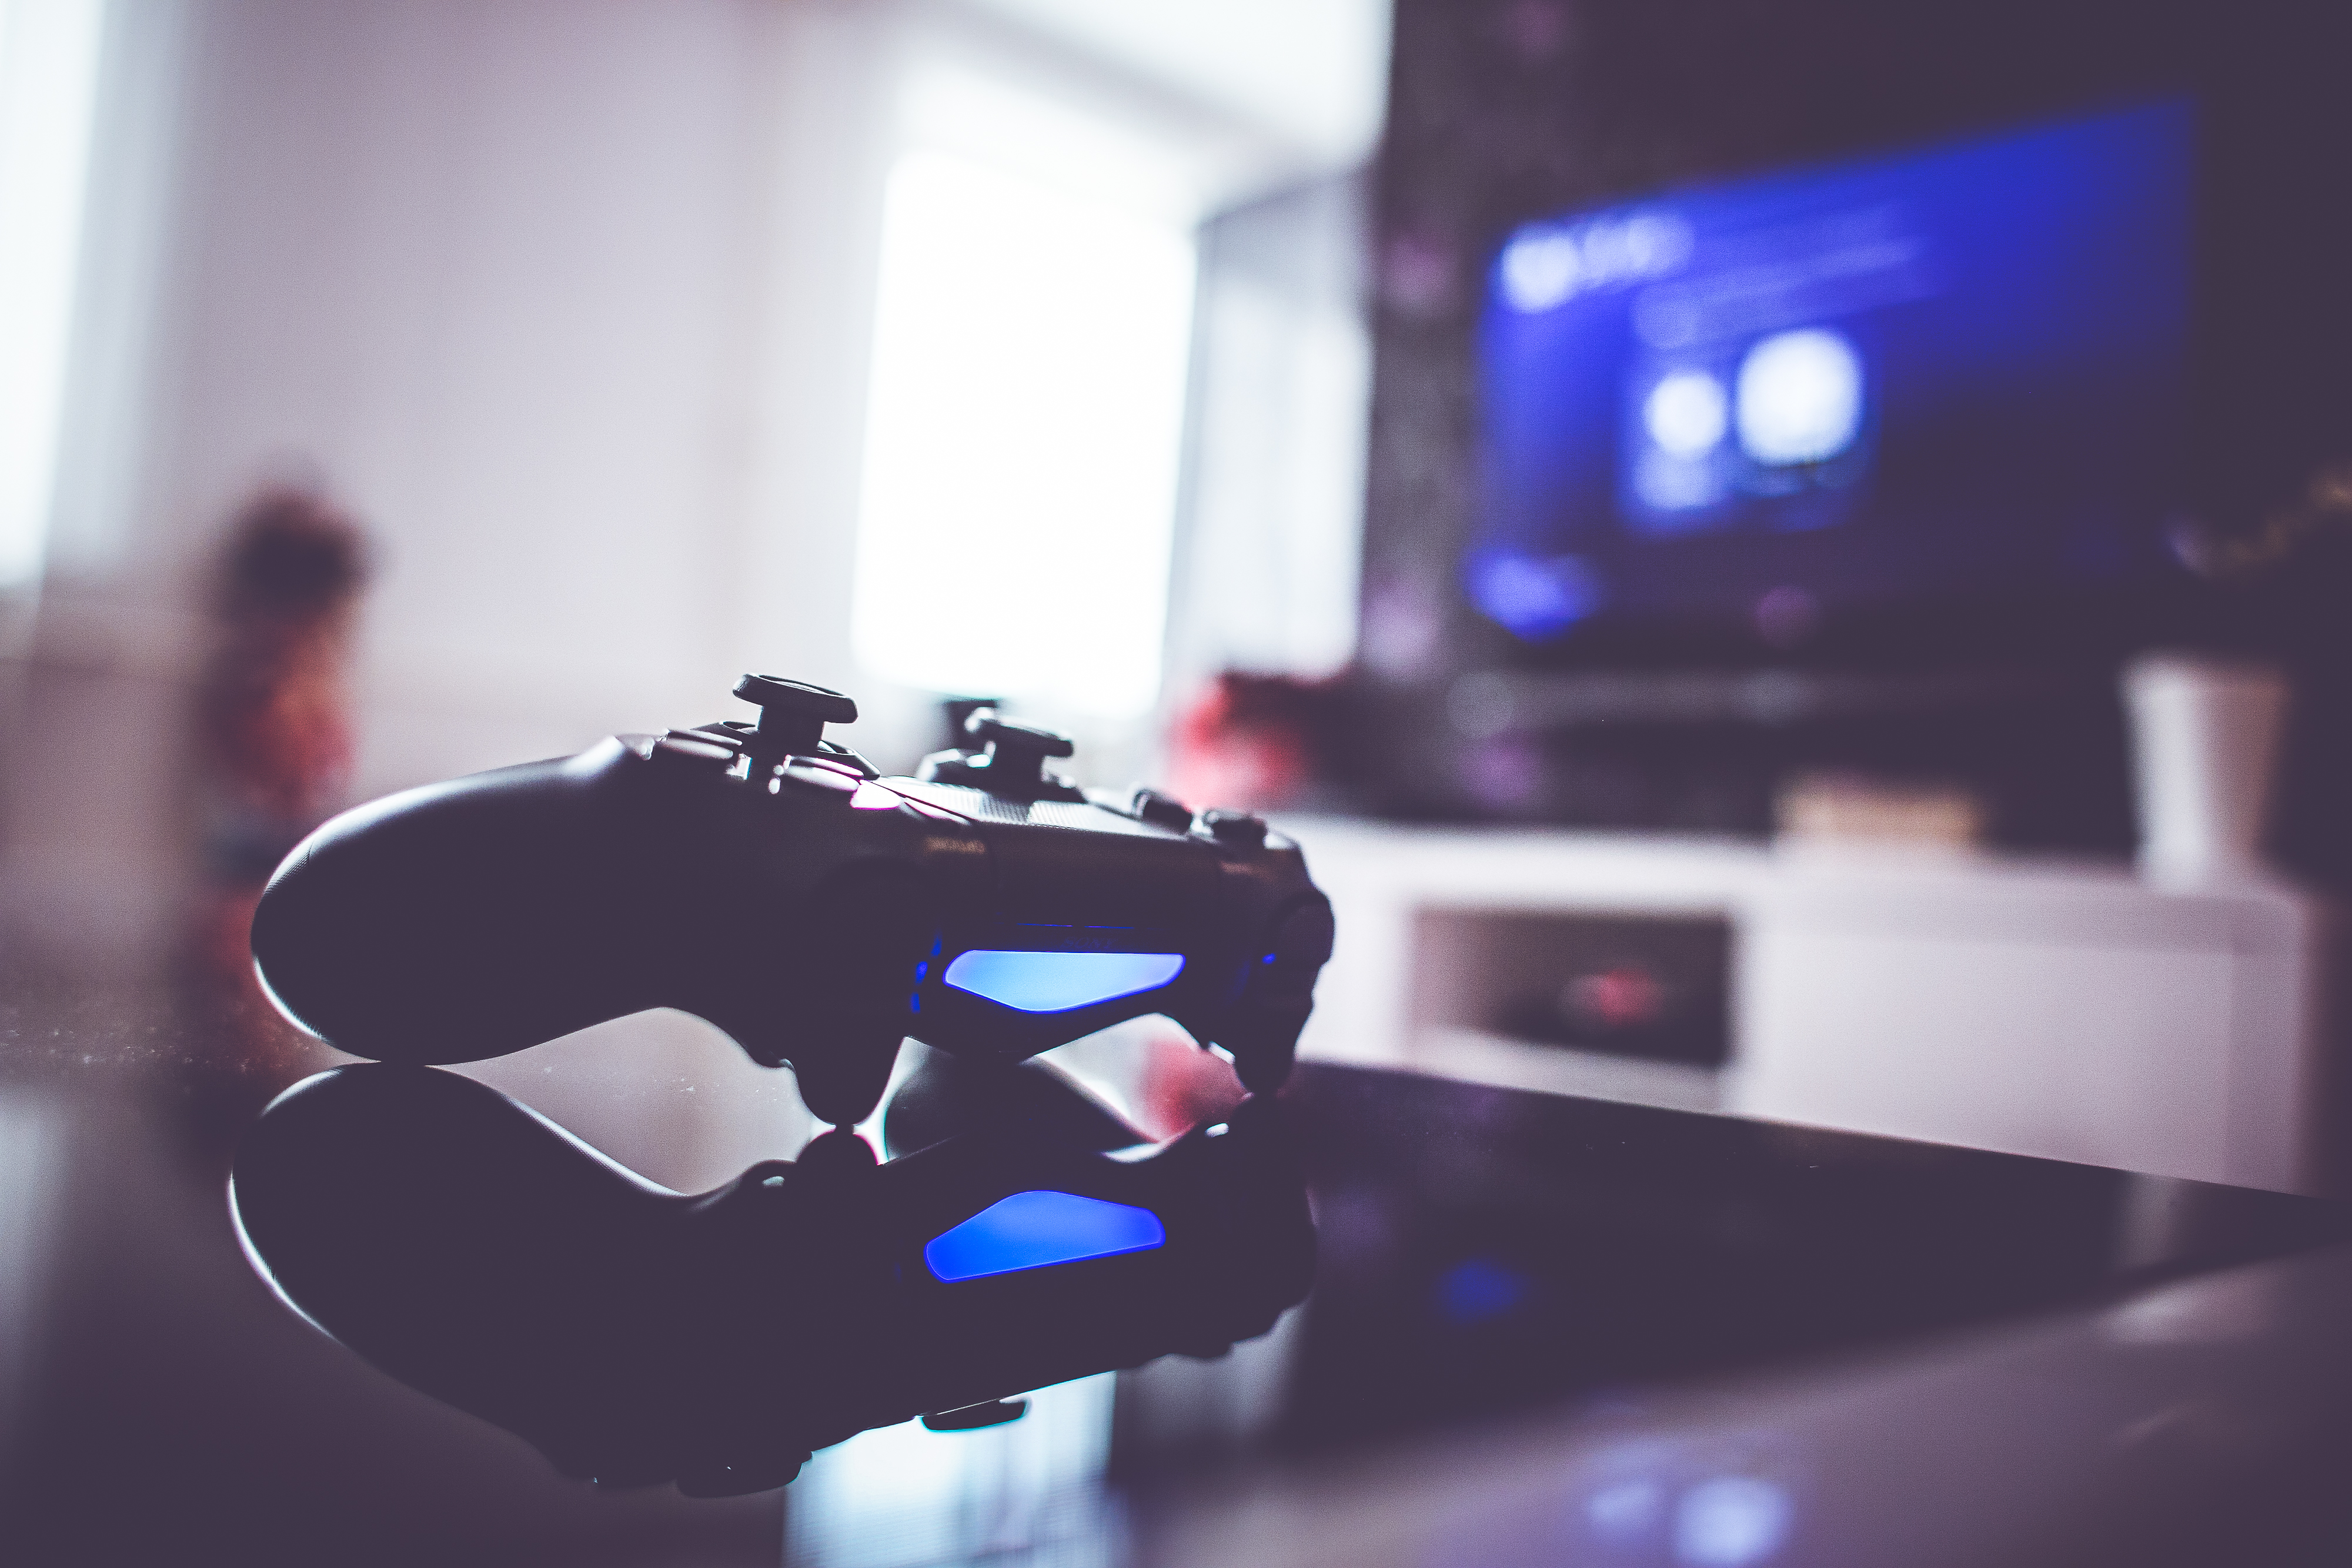 Home Automation Gamers: 6 Tips to Create an Immersive Gaming Session | Home Automation Blog